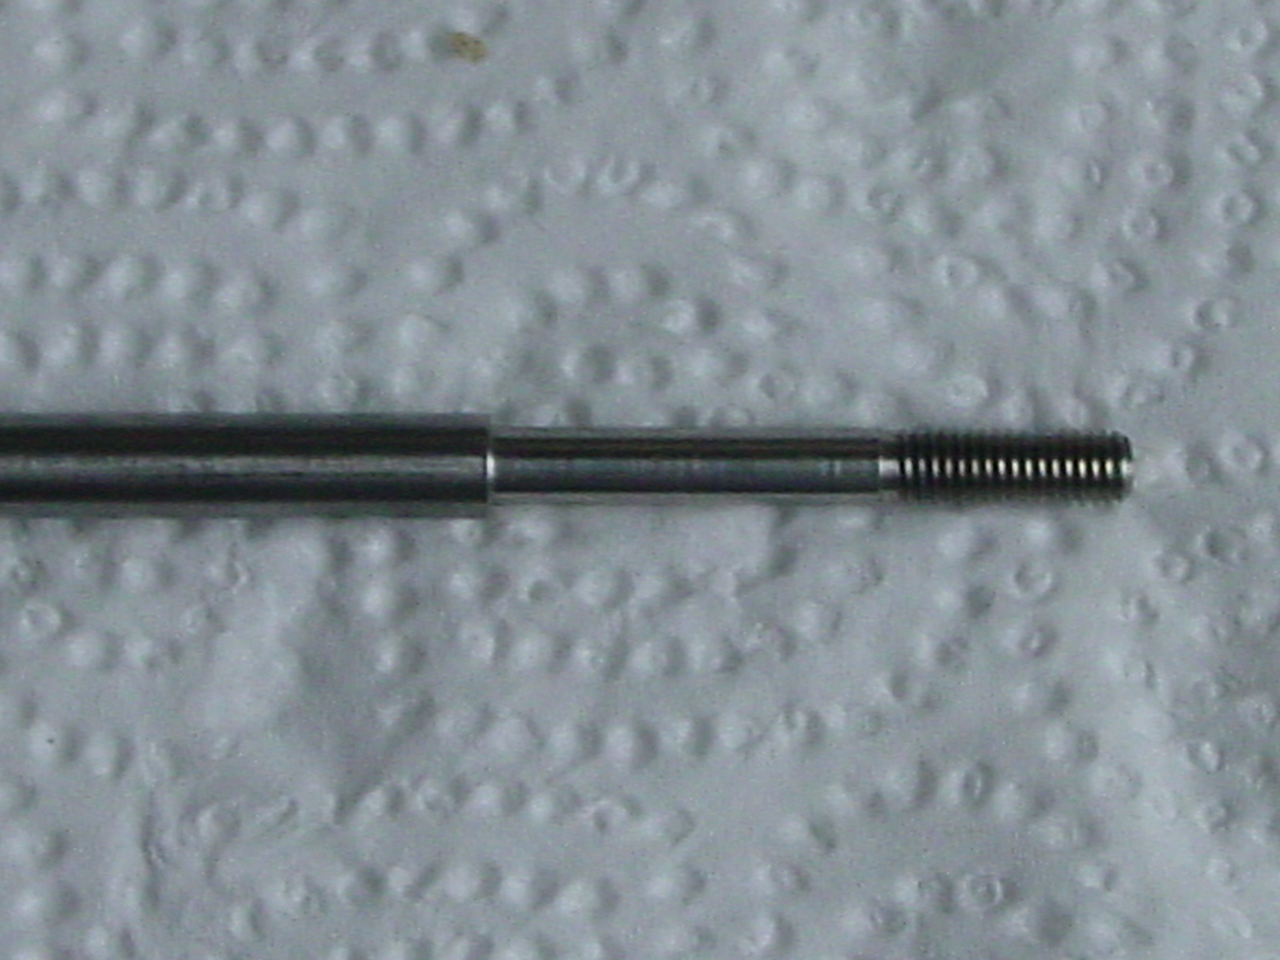 33\" 1/4\" flexible cable with step 3/16\" stub shaft